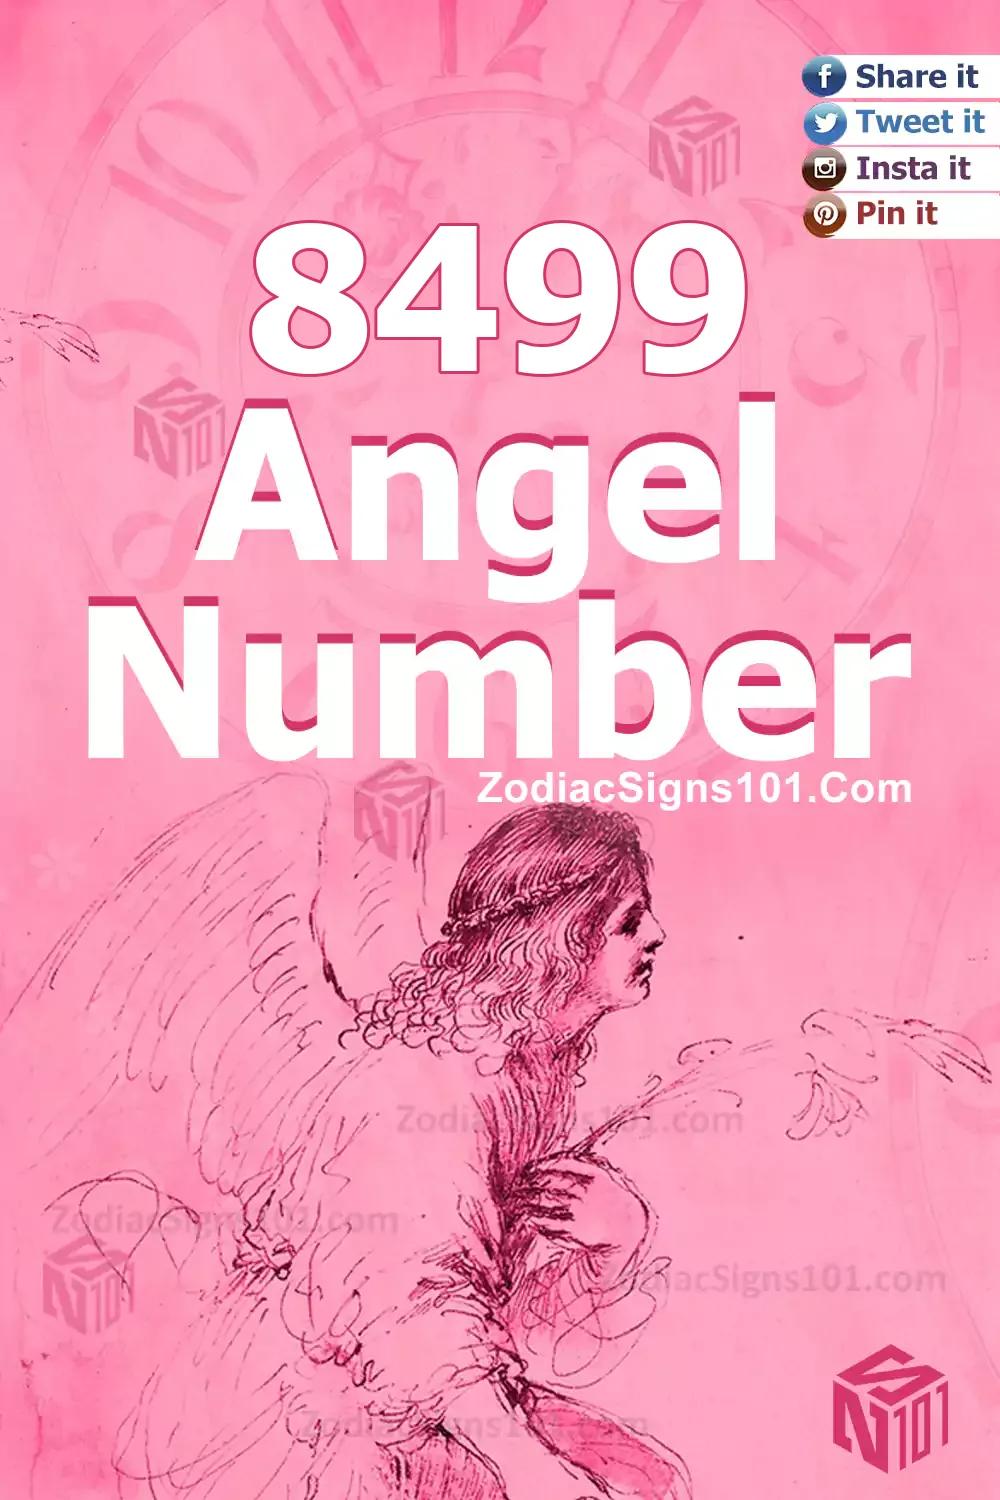 8499 Angel Number Meaning